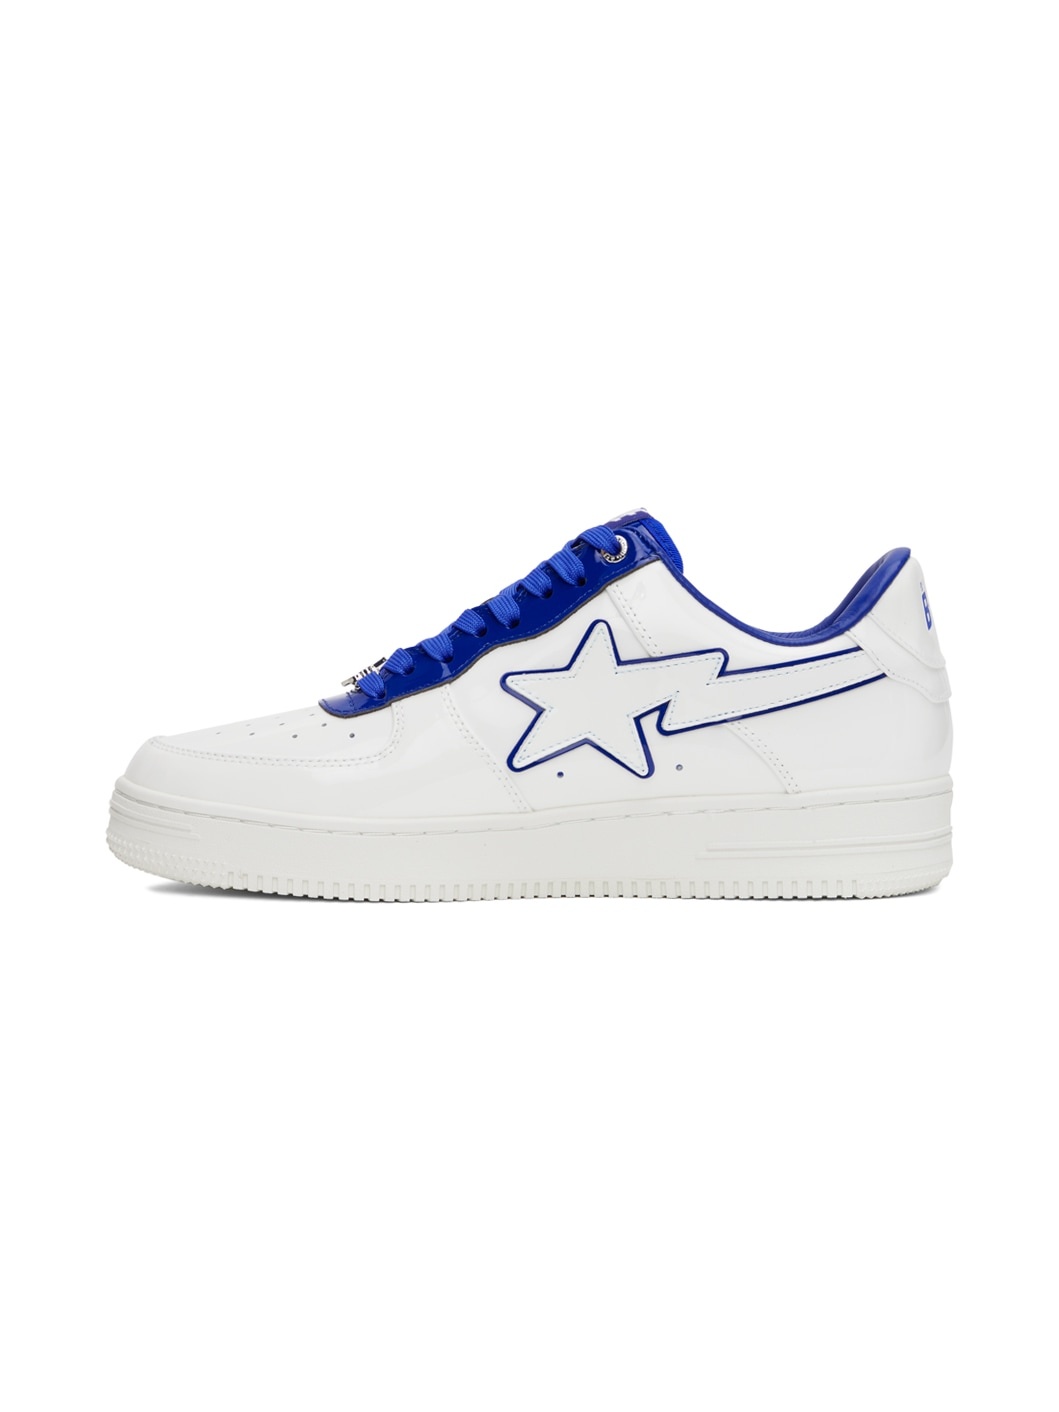 White & Navy Patent Leather Sneakers - 3